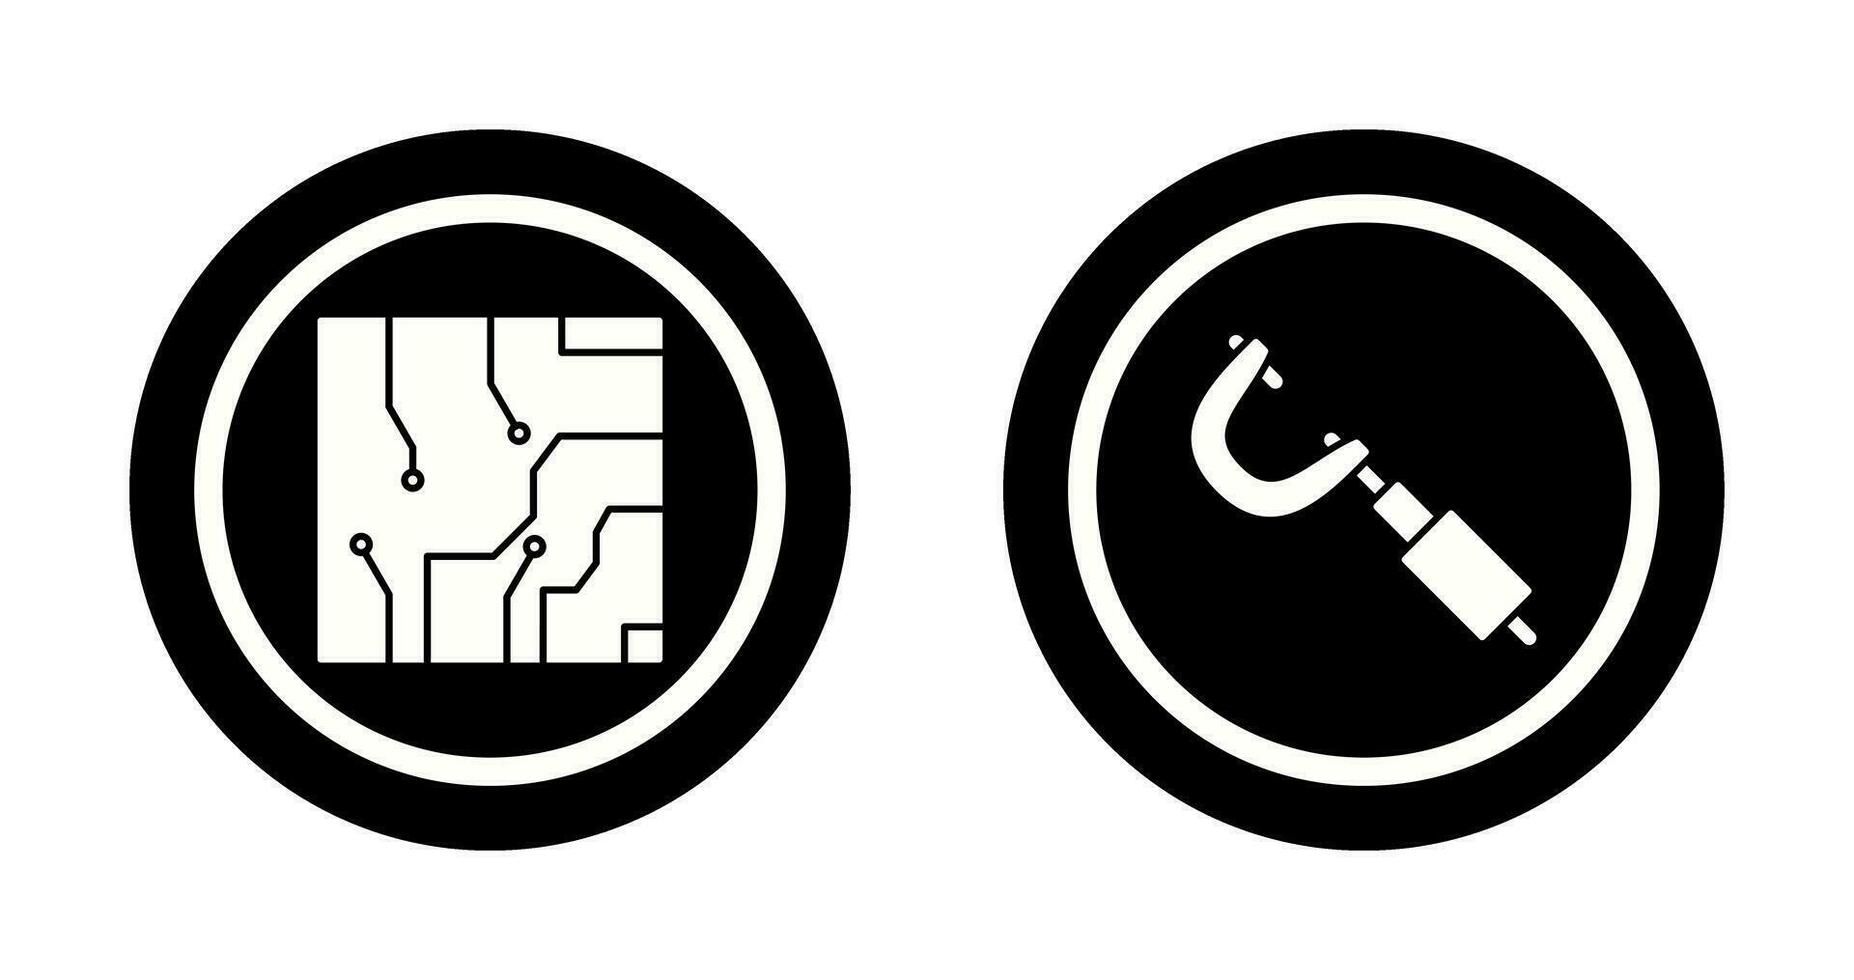 Electrical circuit and Micrometer Icon vector